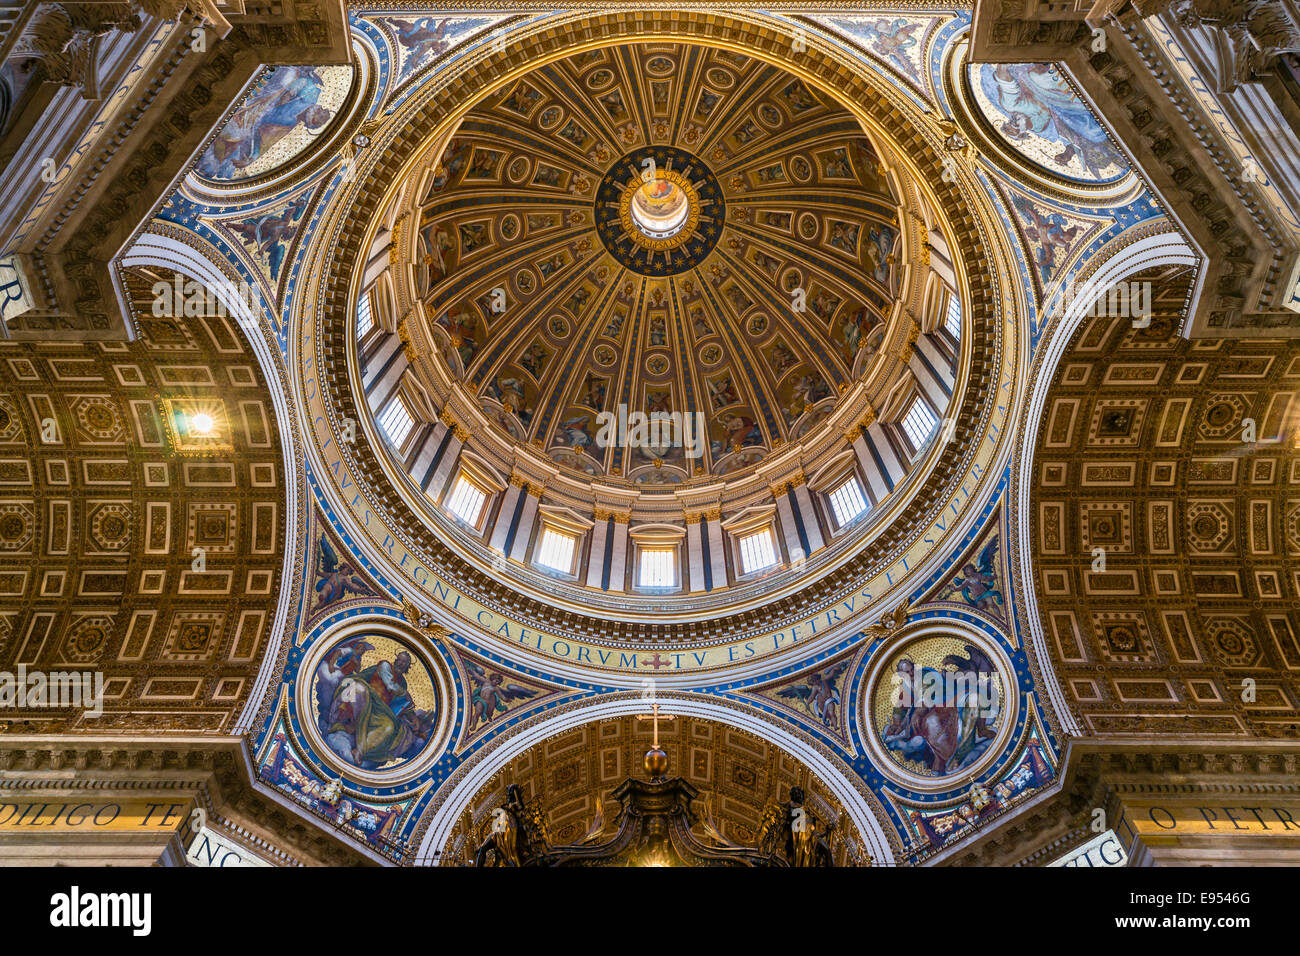 Transept with the dome of the Basilica San Pietro, St. Peter's Basilica, Vatican, Vatican City, Rome, Italy Stock Photo